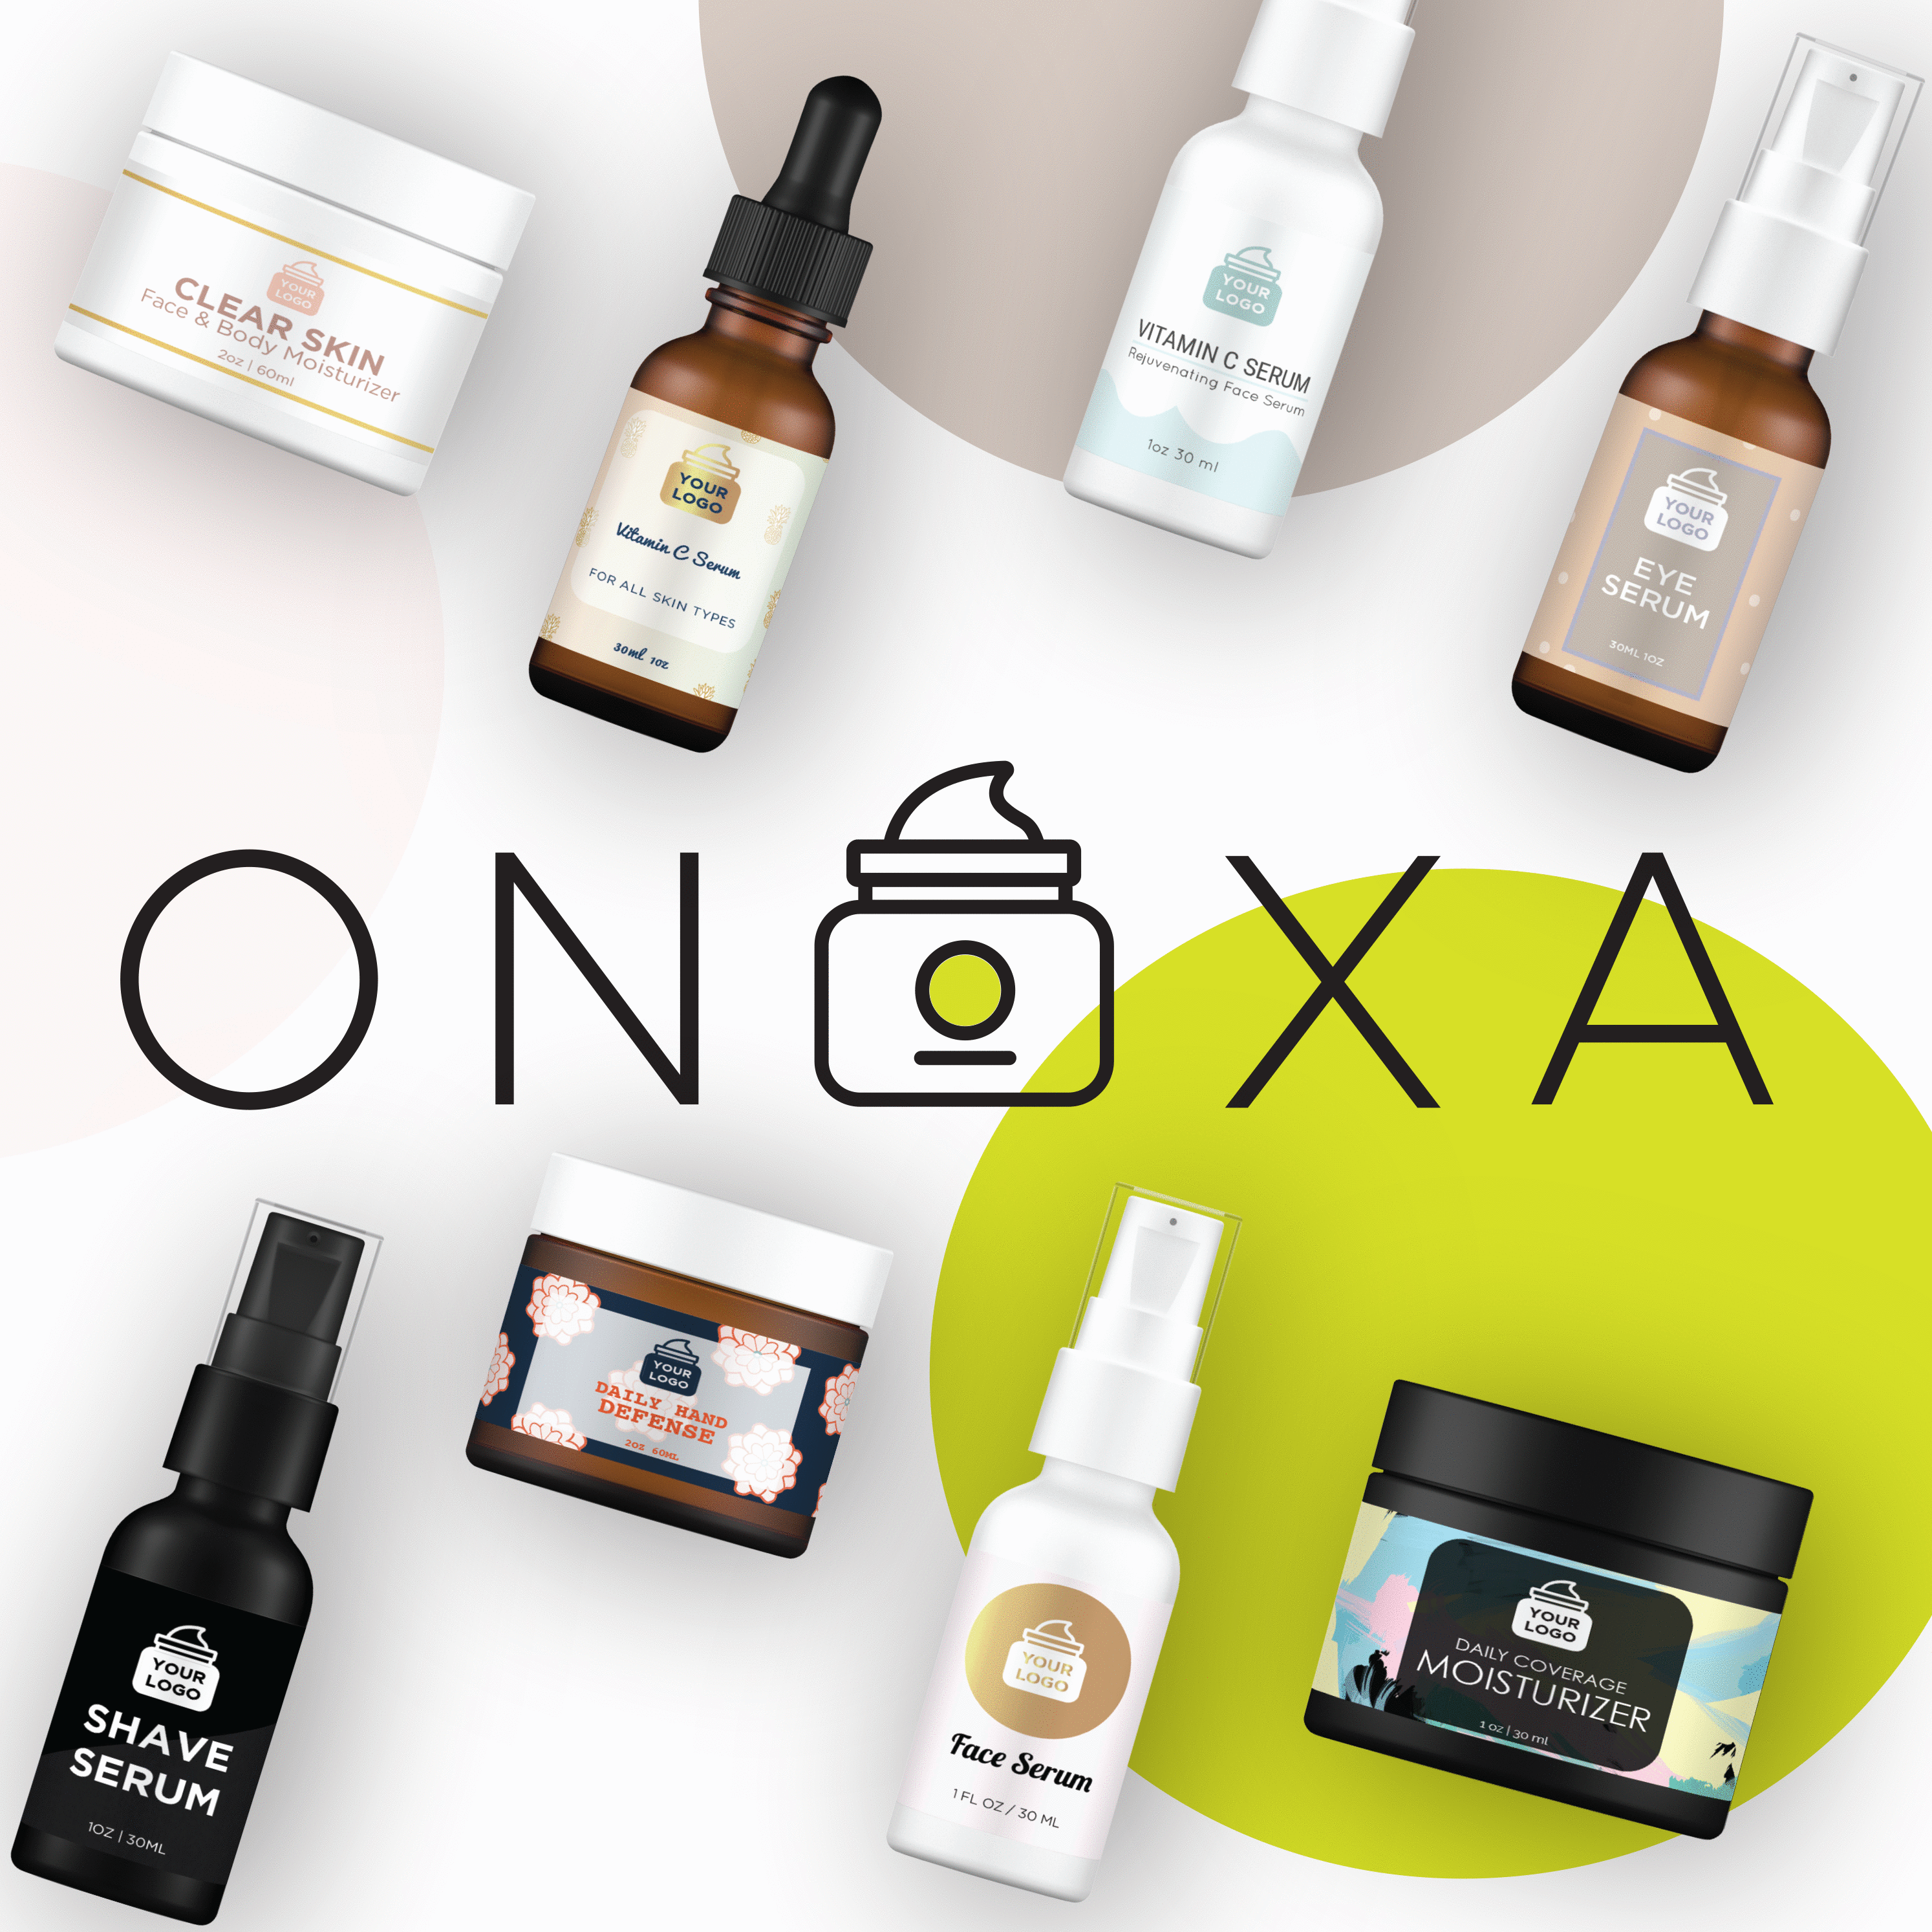 Onoxa – How To Create Your Own Cosmetic Brand